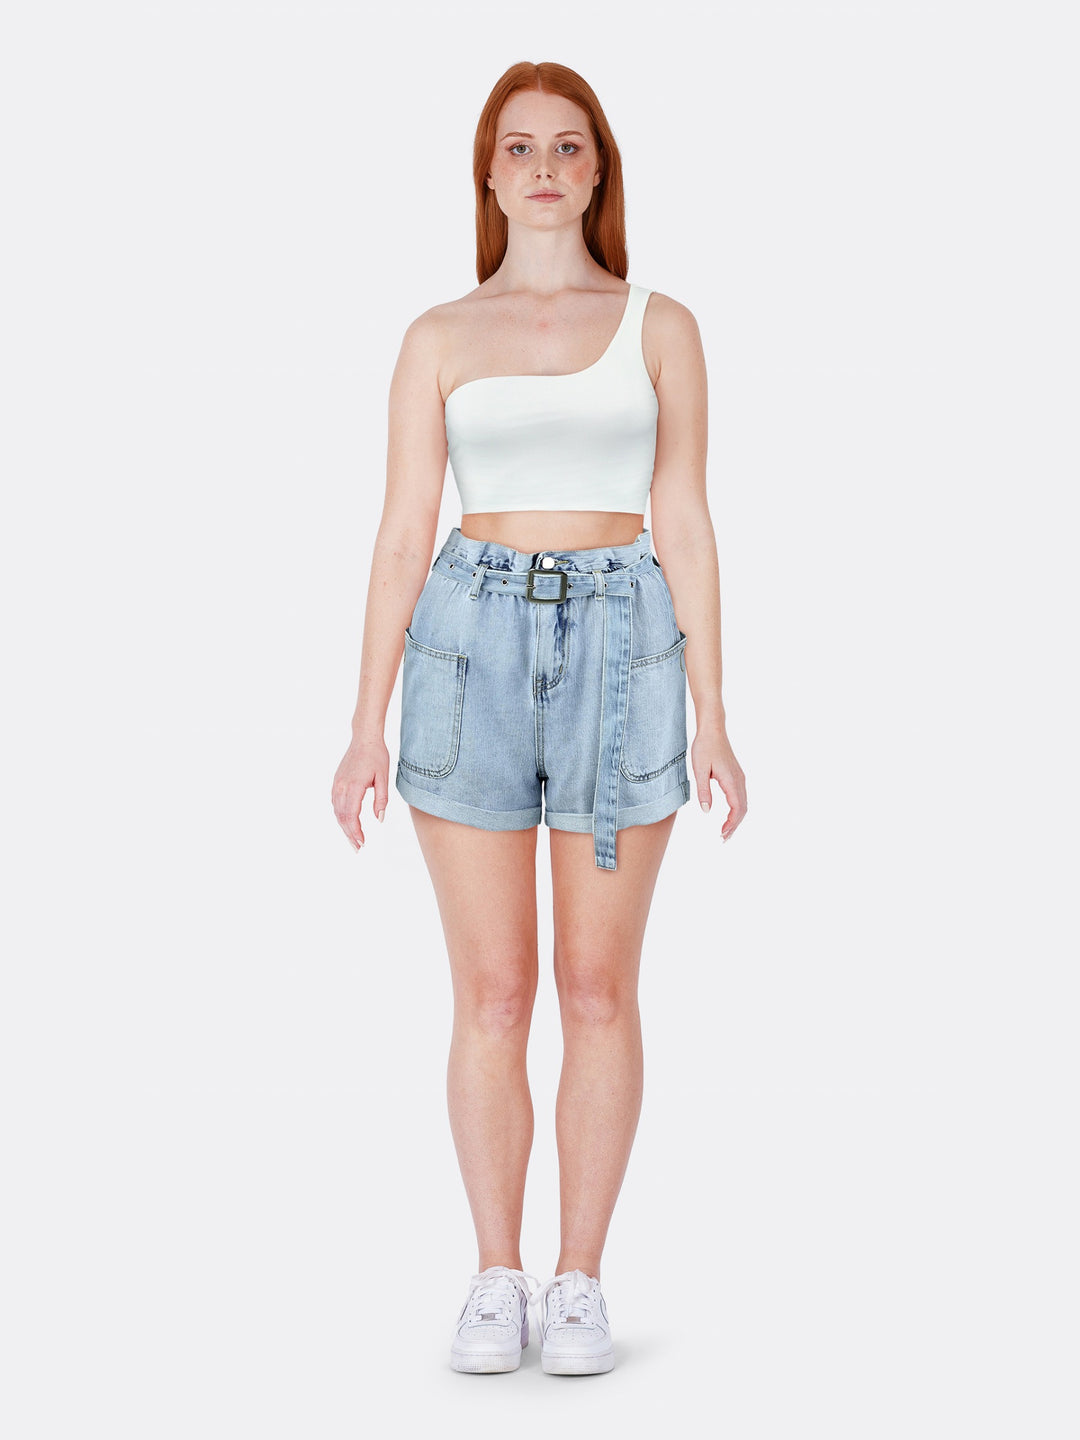 Single Shoulder Top with Criss-Cross Straps at the Back White Front